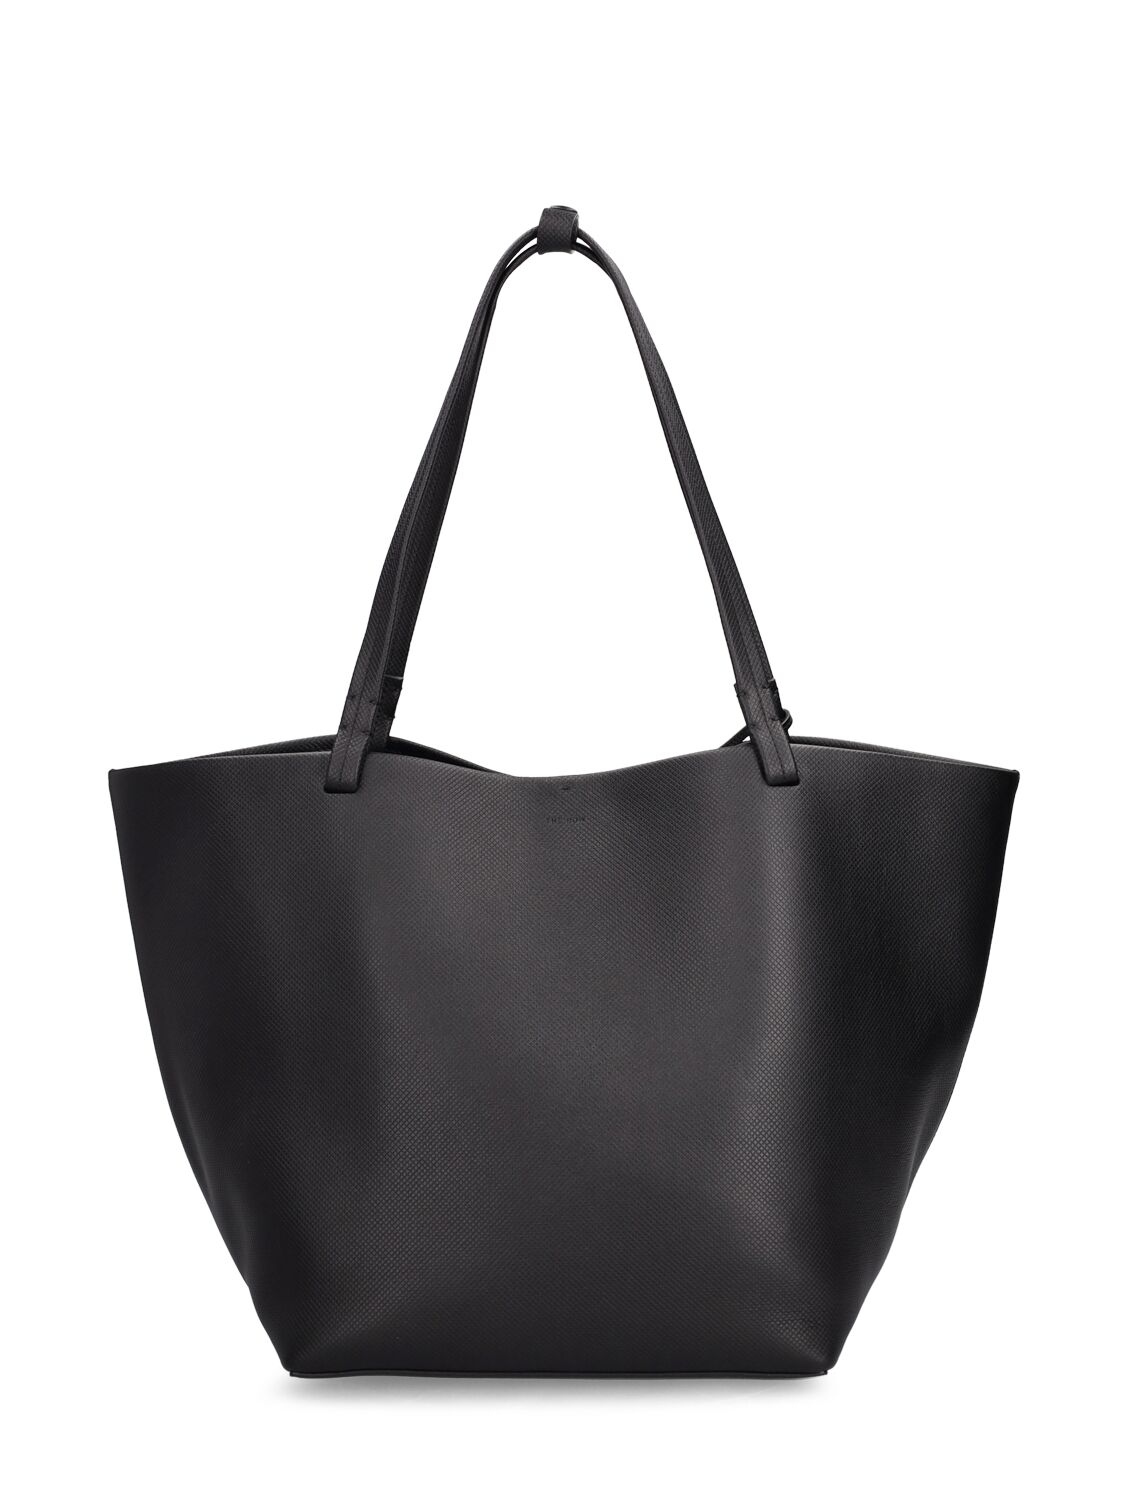 Image of Park Tote Leather Tote Bag